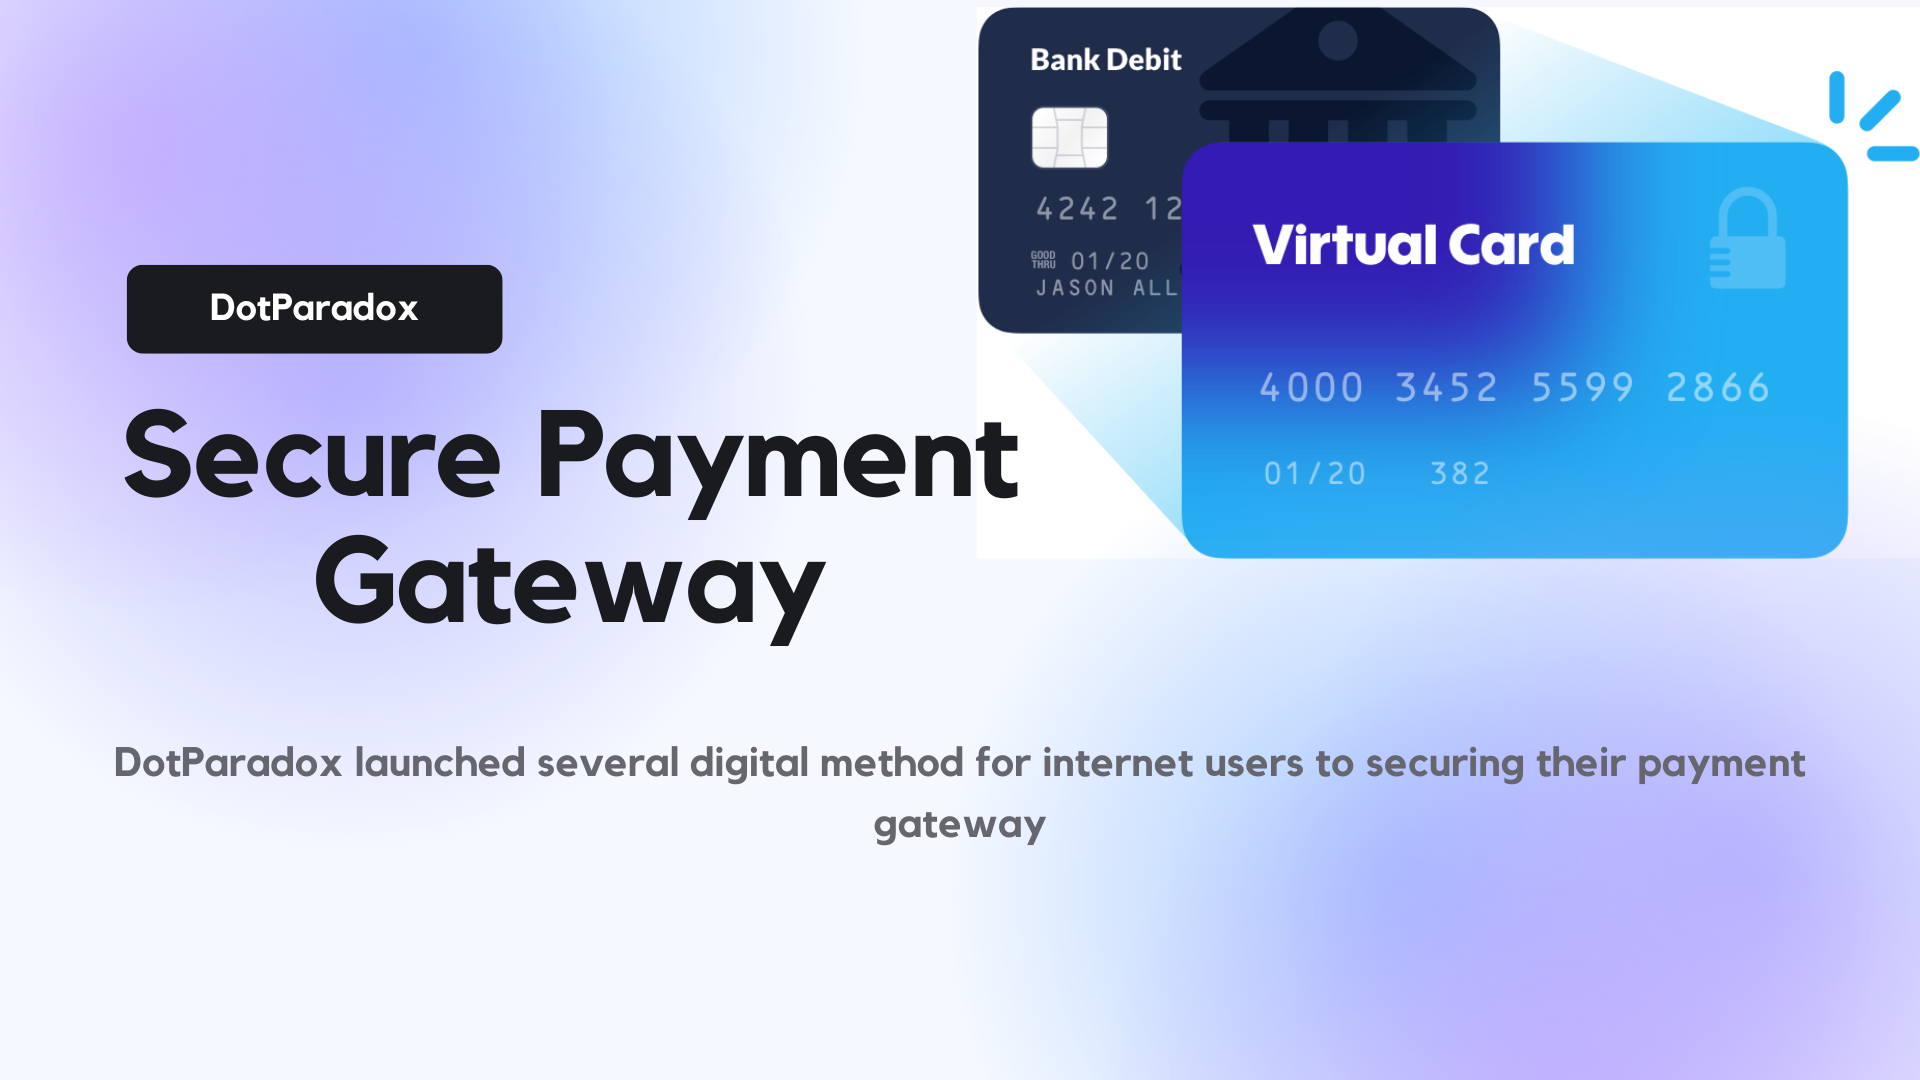 DotParadox launched several digital method for internet users to securing their payment gateway